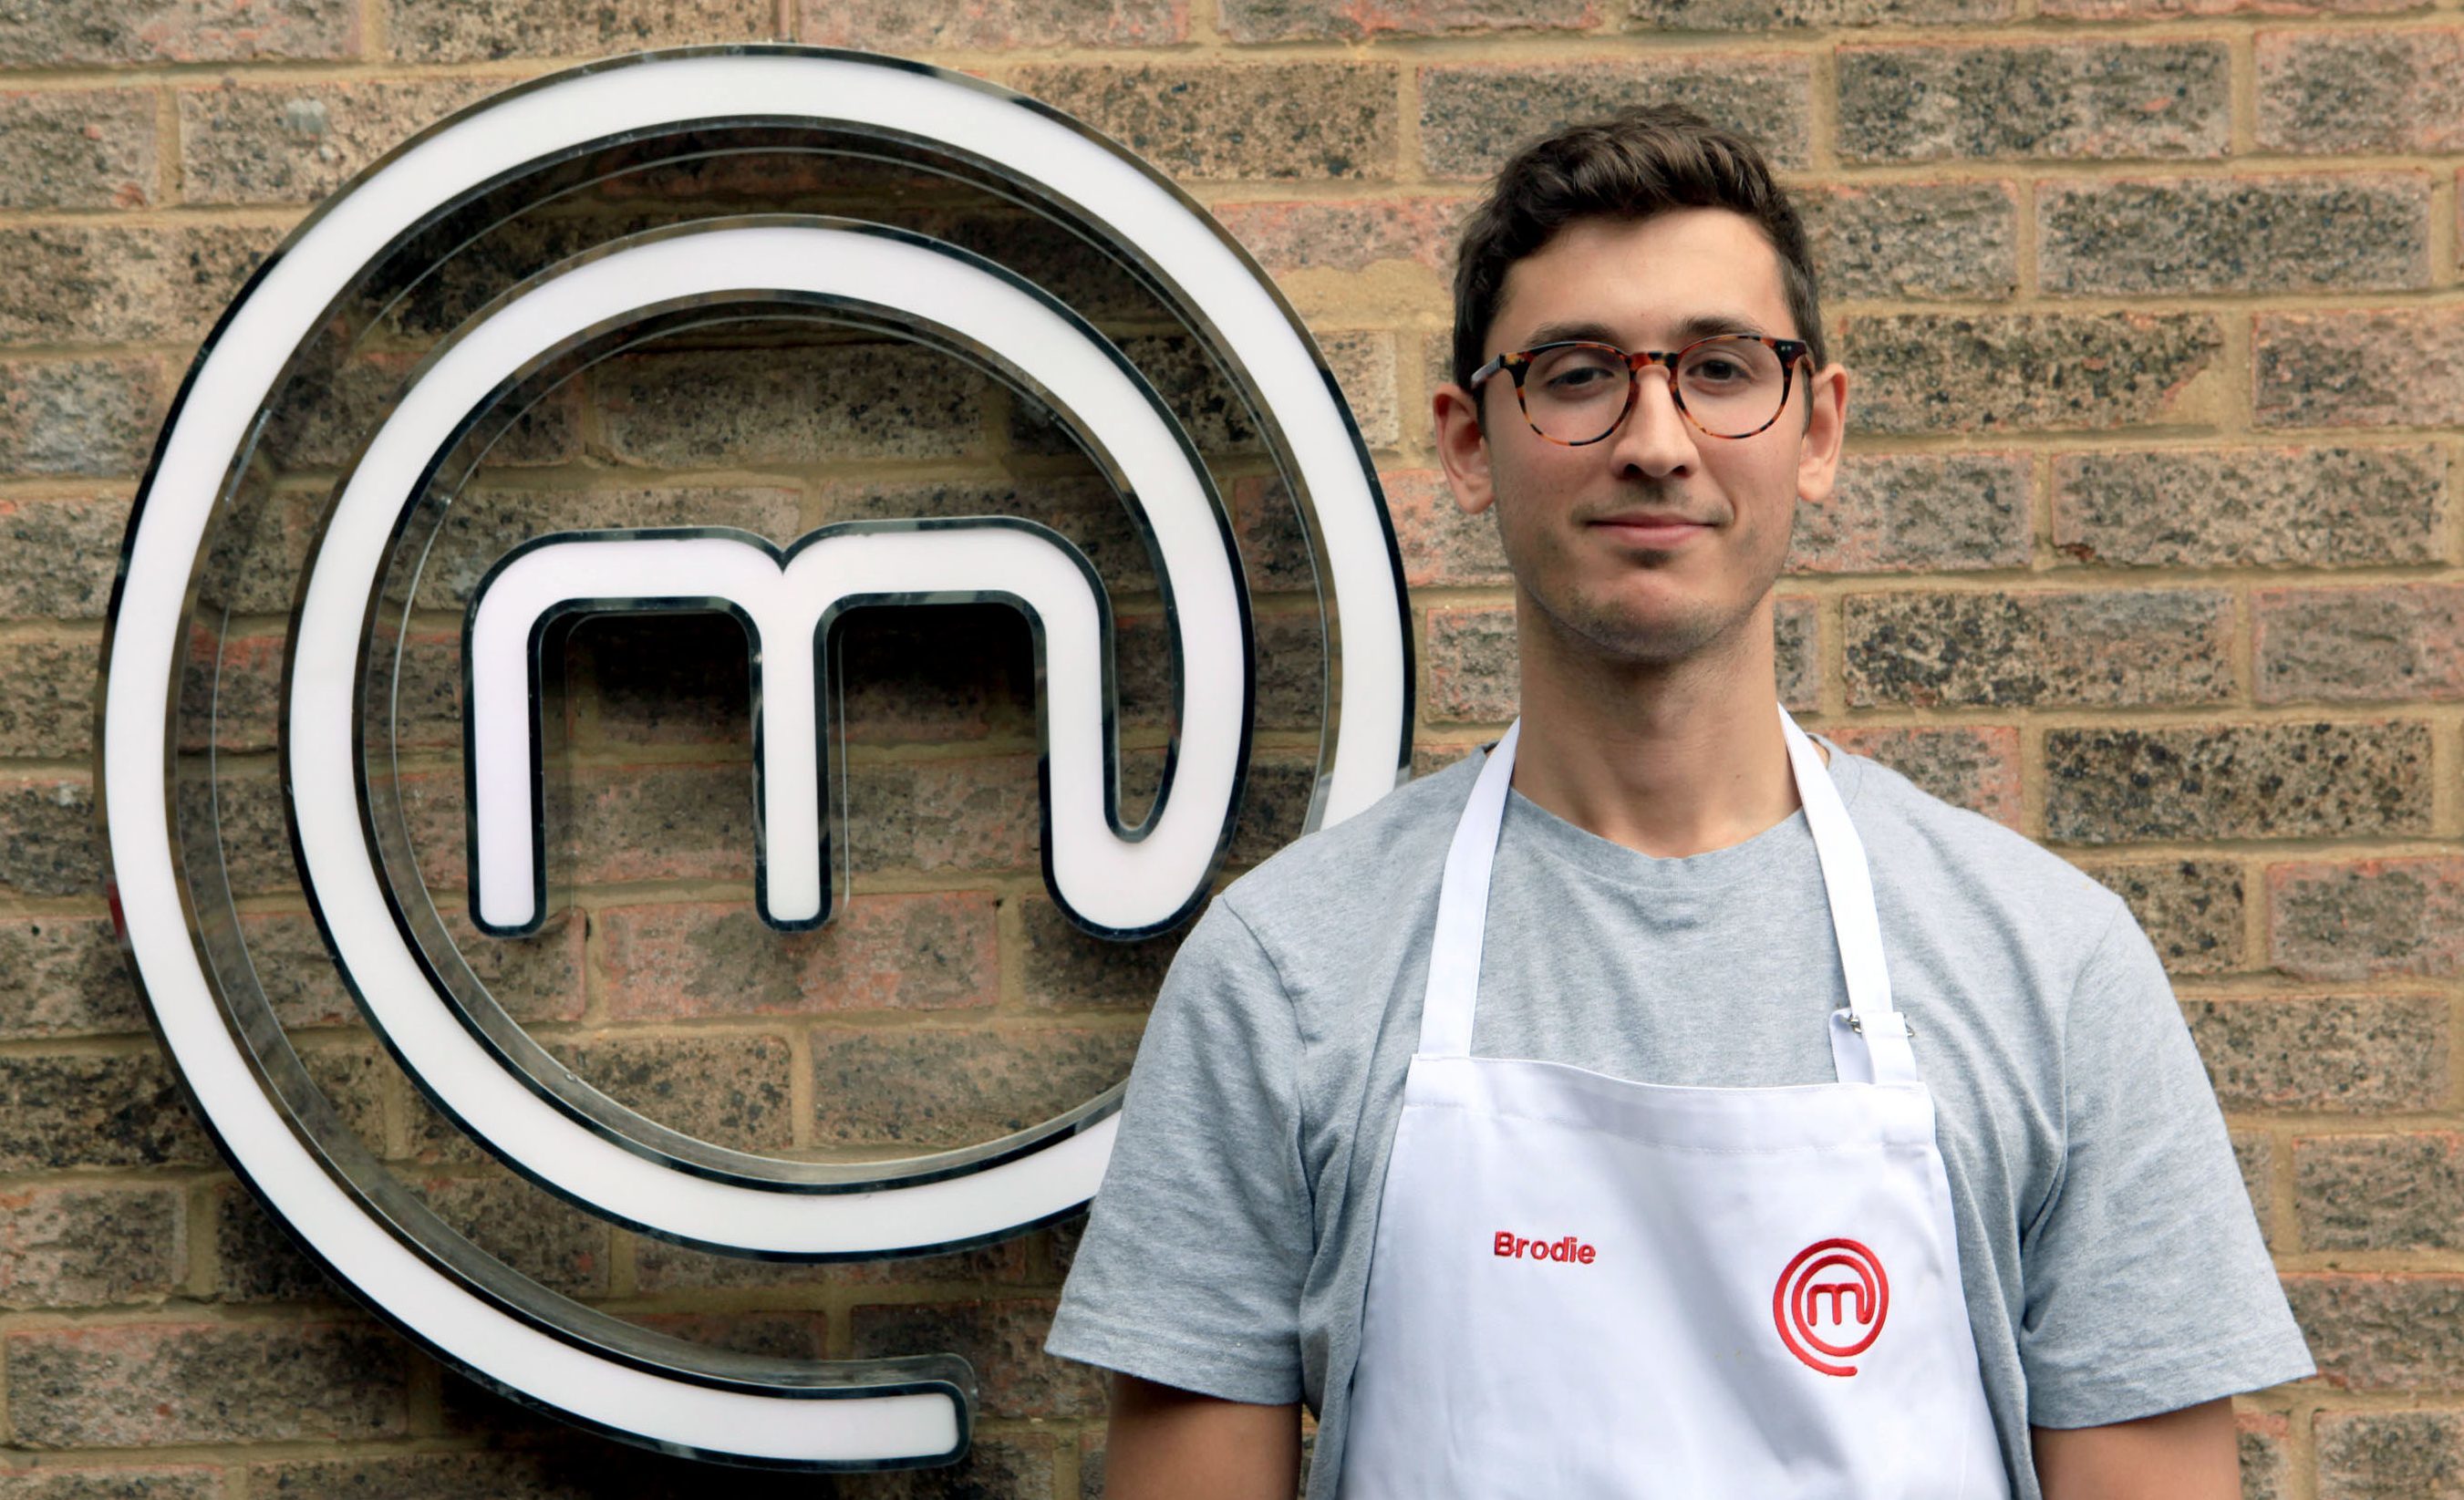 Brodie Williams from Cupar made it through to the semi-finals of BBC MasterChef